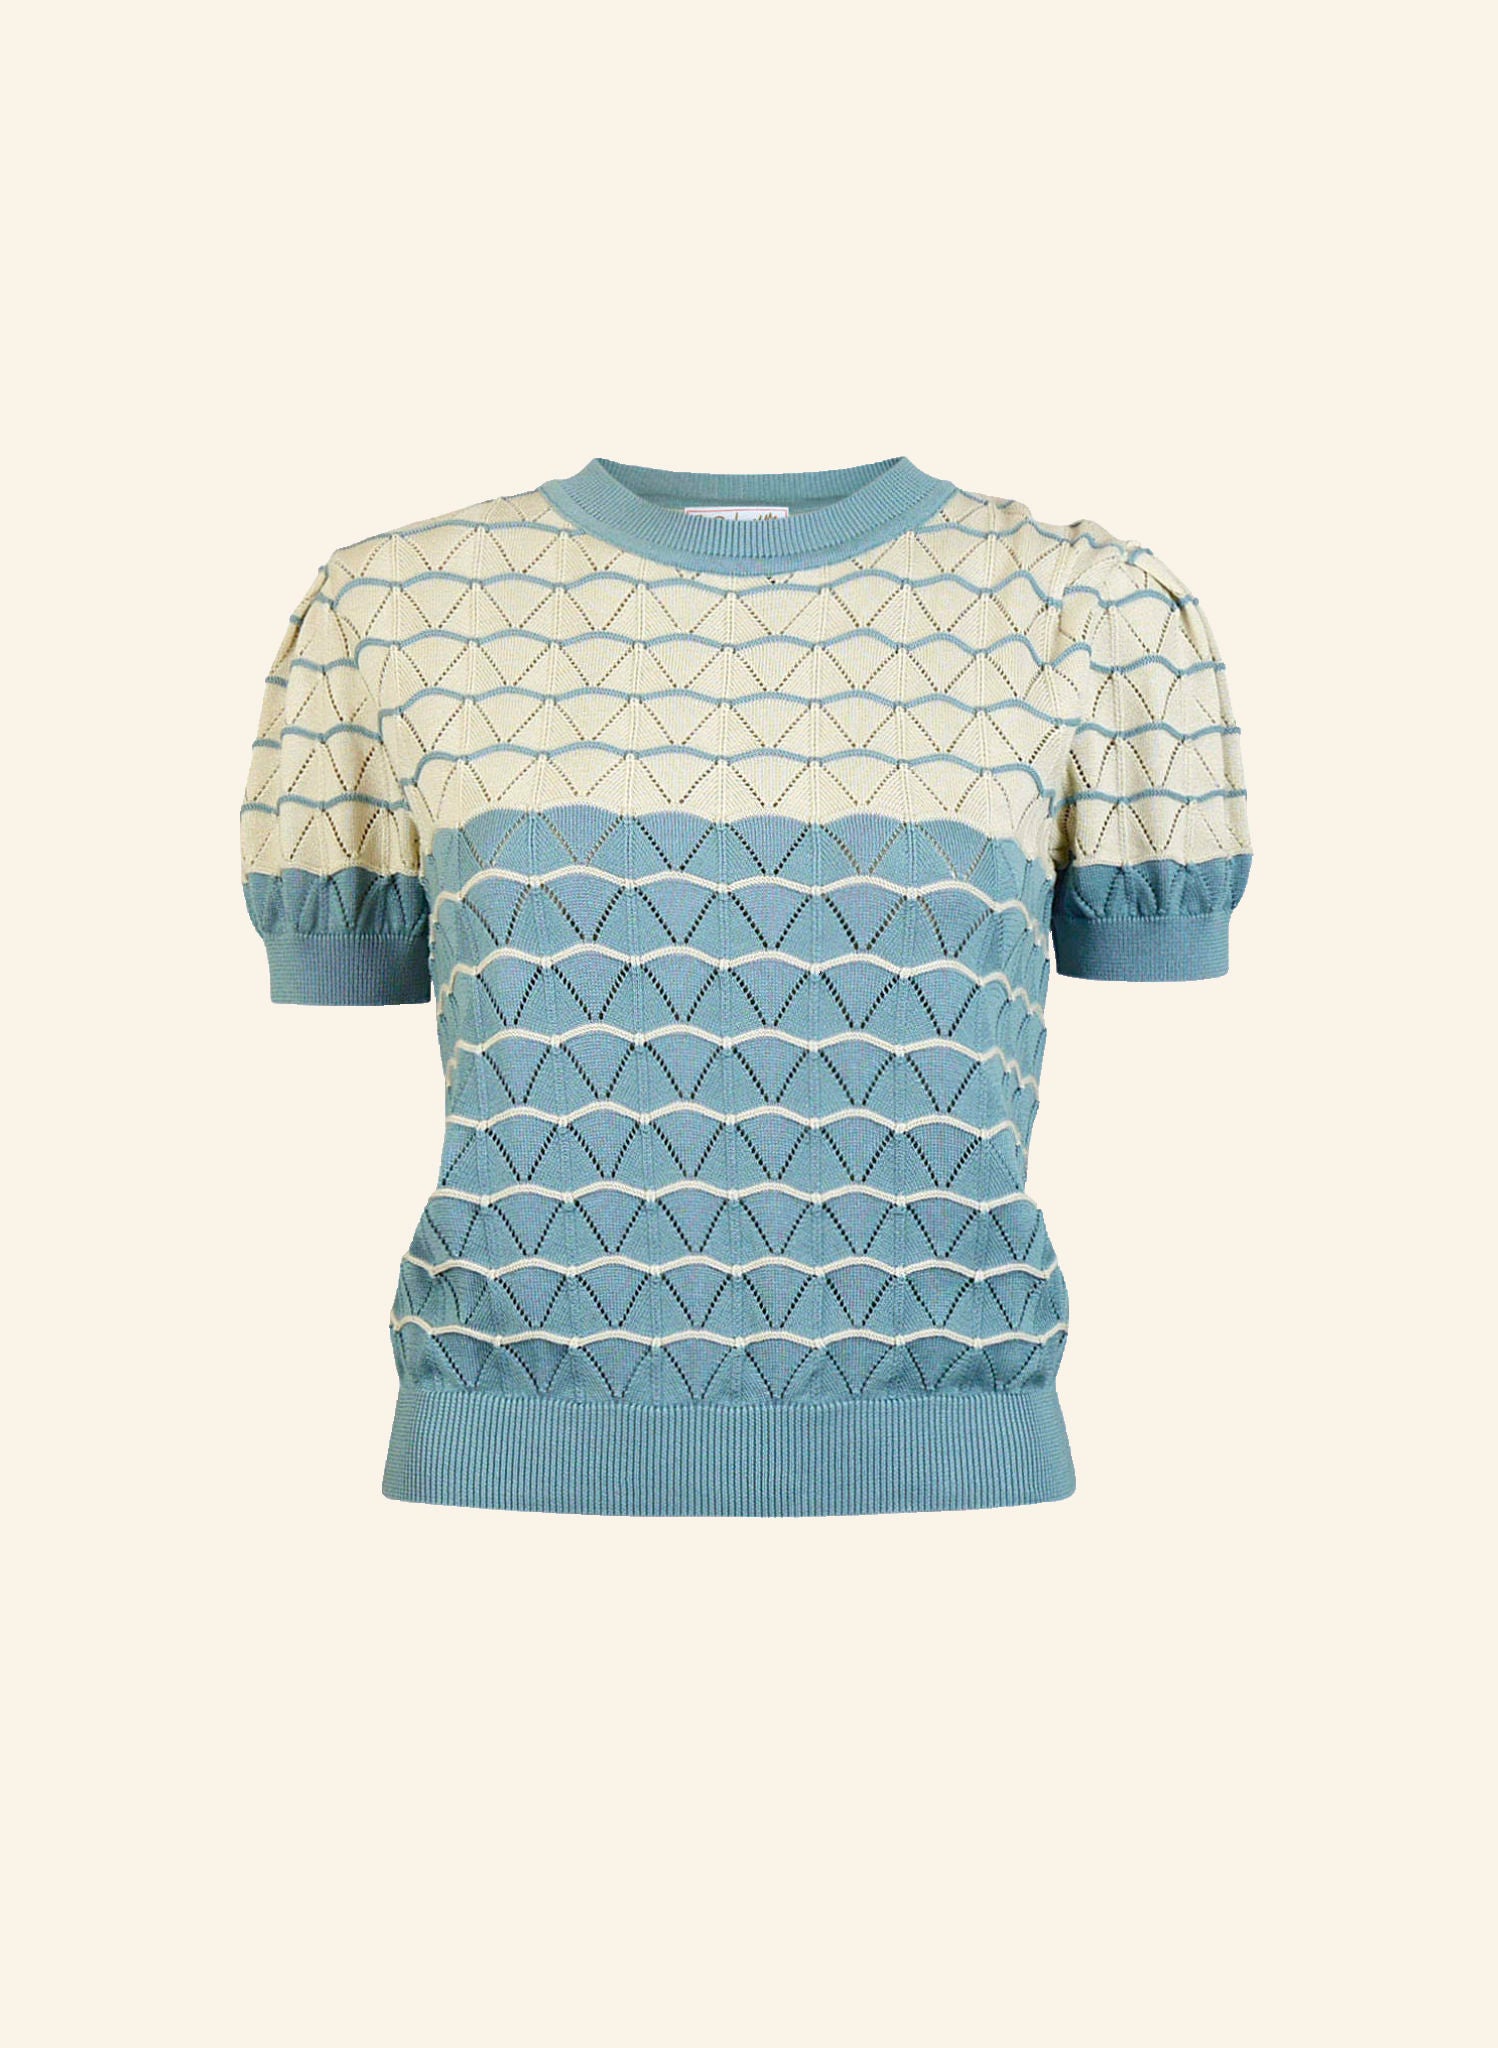 Eve - Teal Shell - Knitted Top